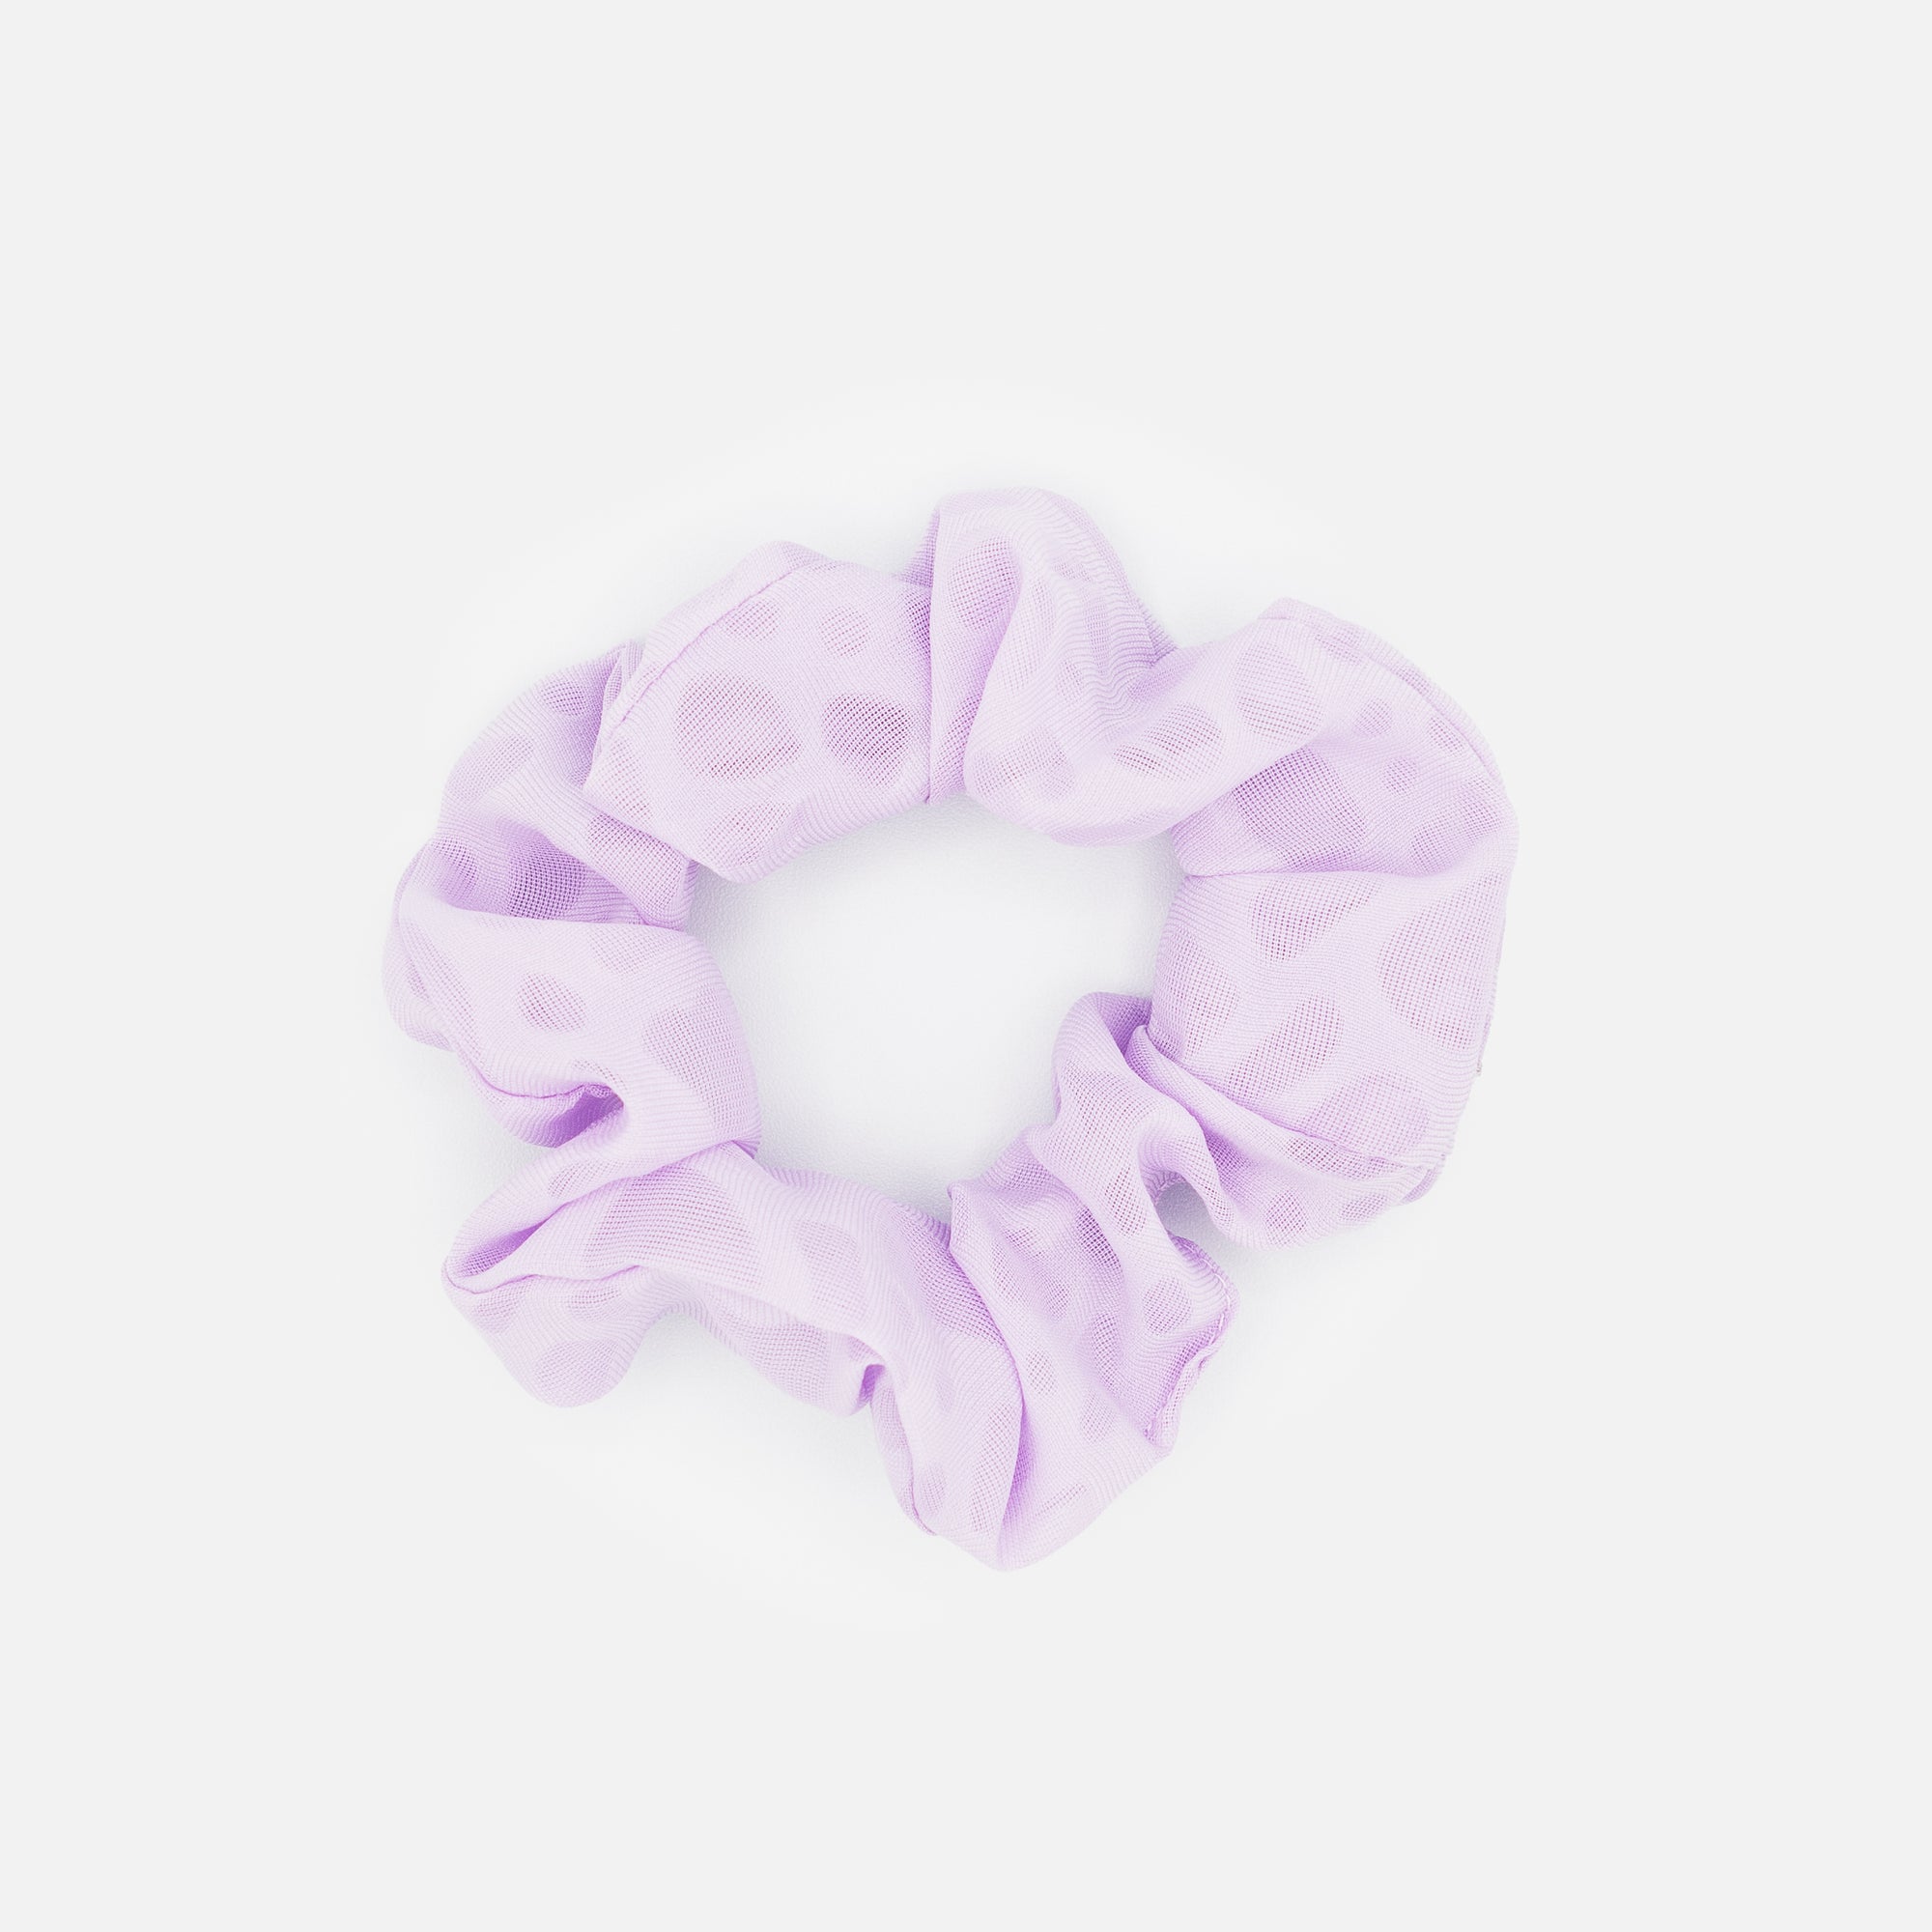 Trio of turquoise, white and mauve scrunchies